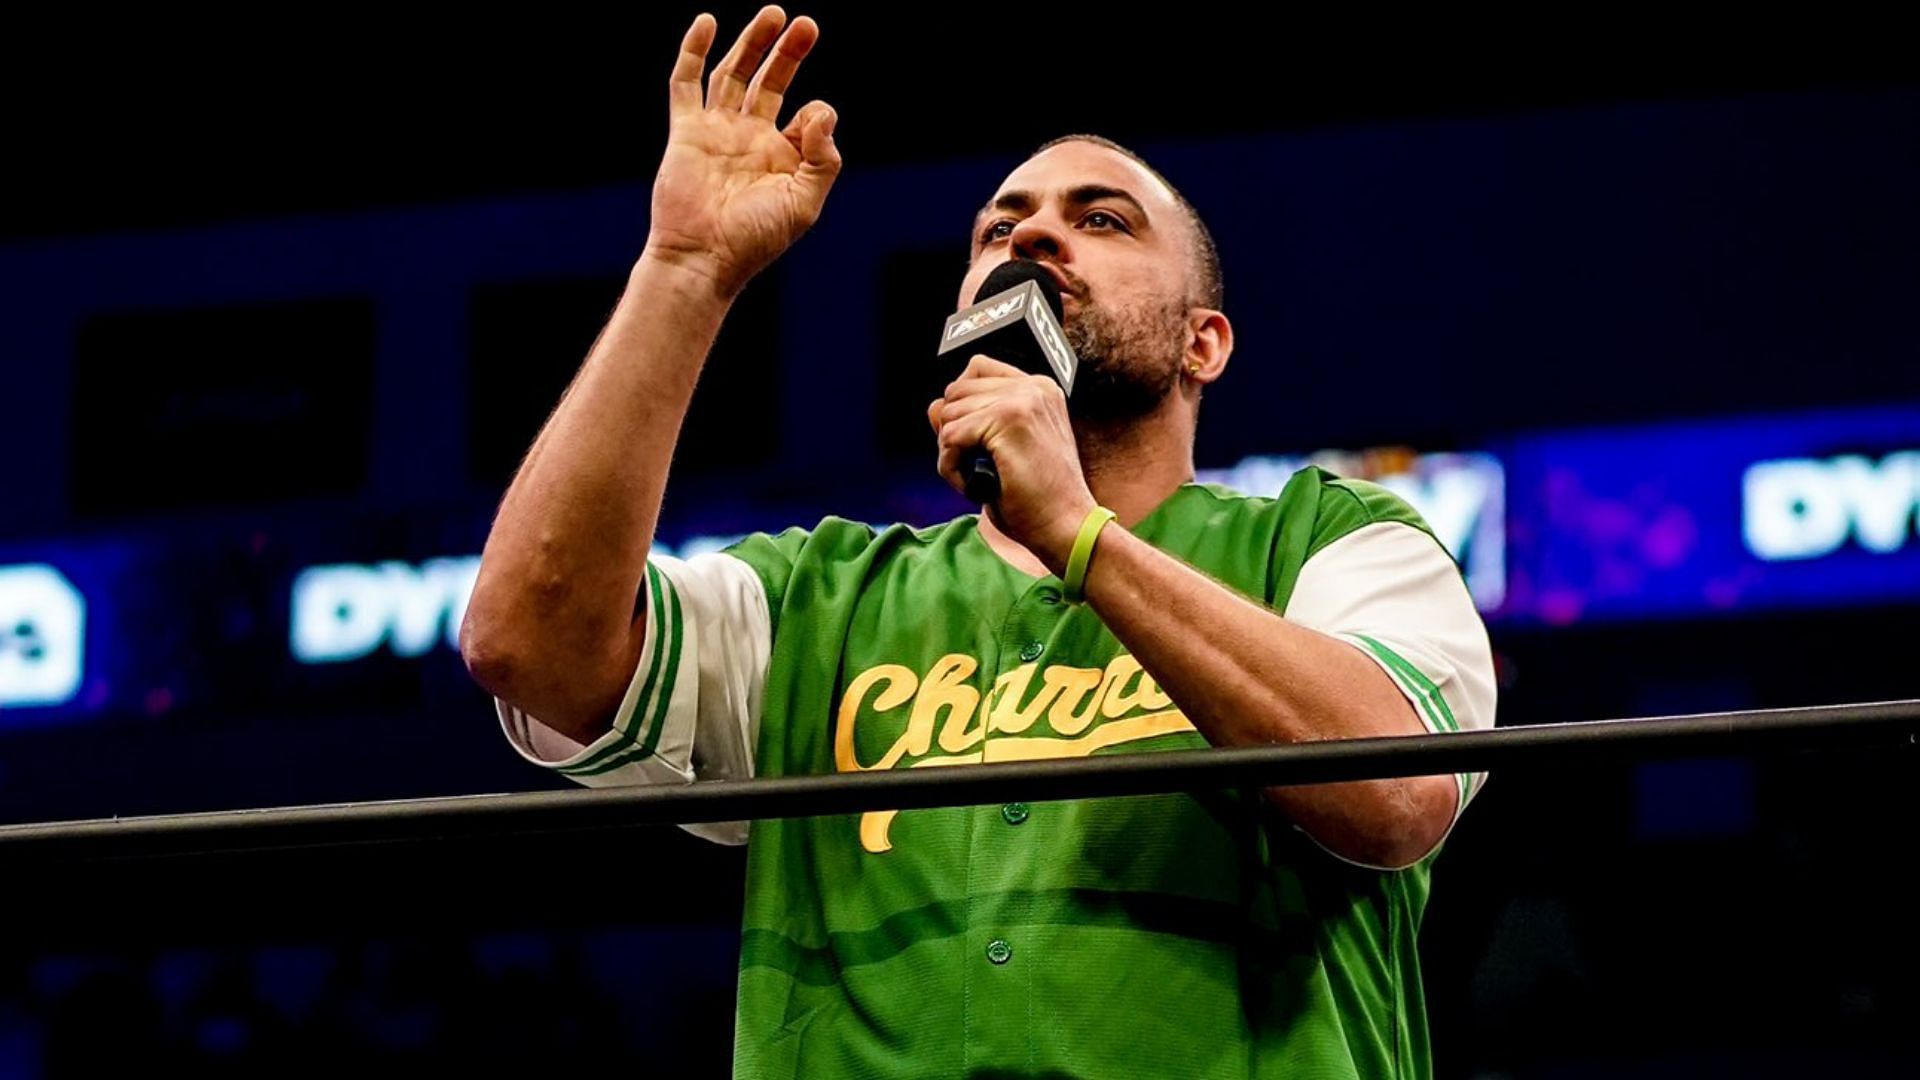 Eddie Kingston cutting a promo at an AEW event in 2022